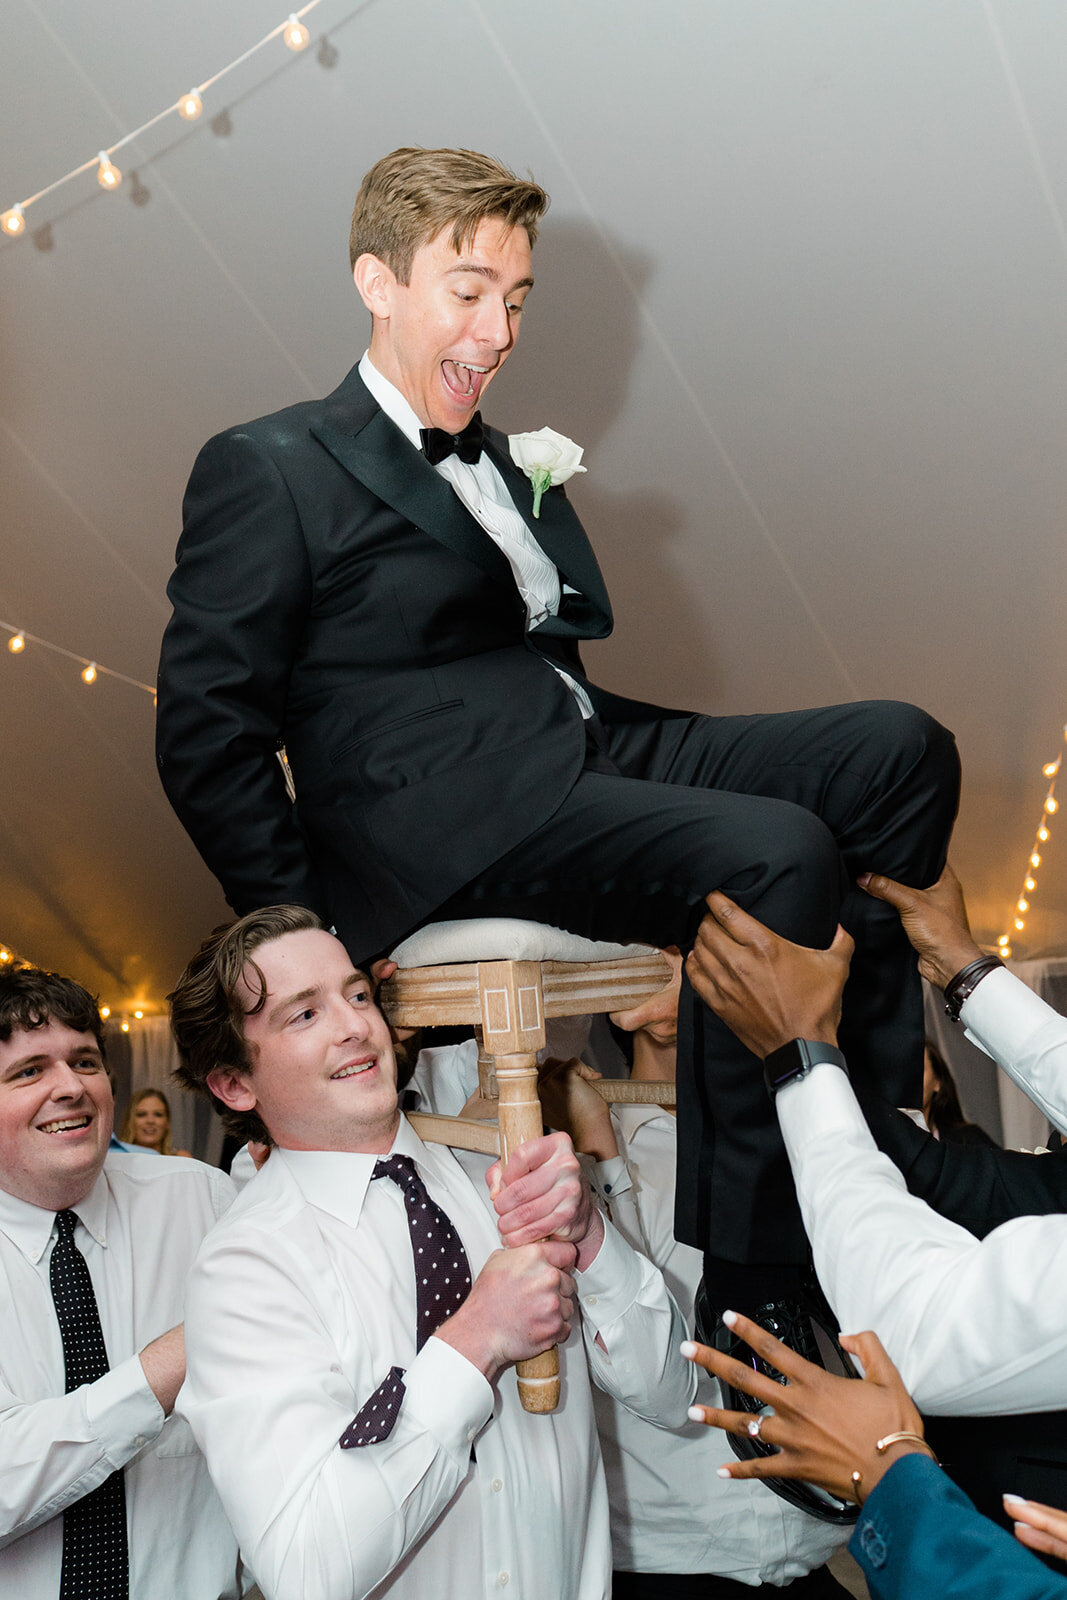 Wedding guests lift up groom in a chair on the dance floor at Bradley Estate summer wedding. East Coast Destination Wedding Photographer. Kailee DiMeglio Photography.